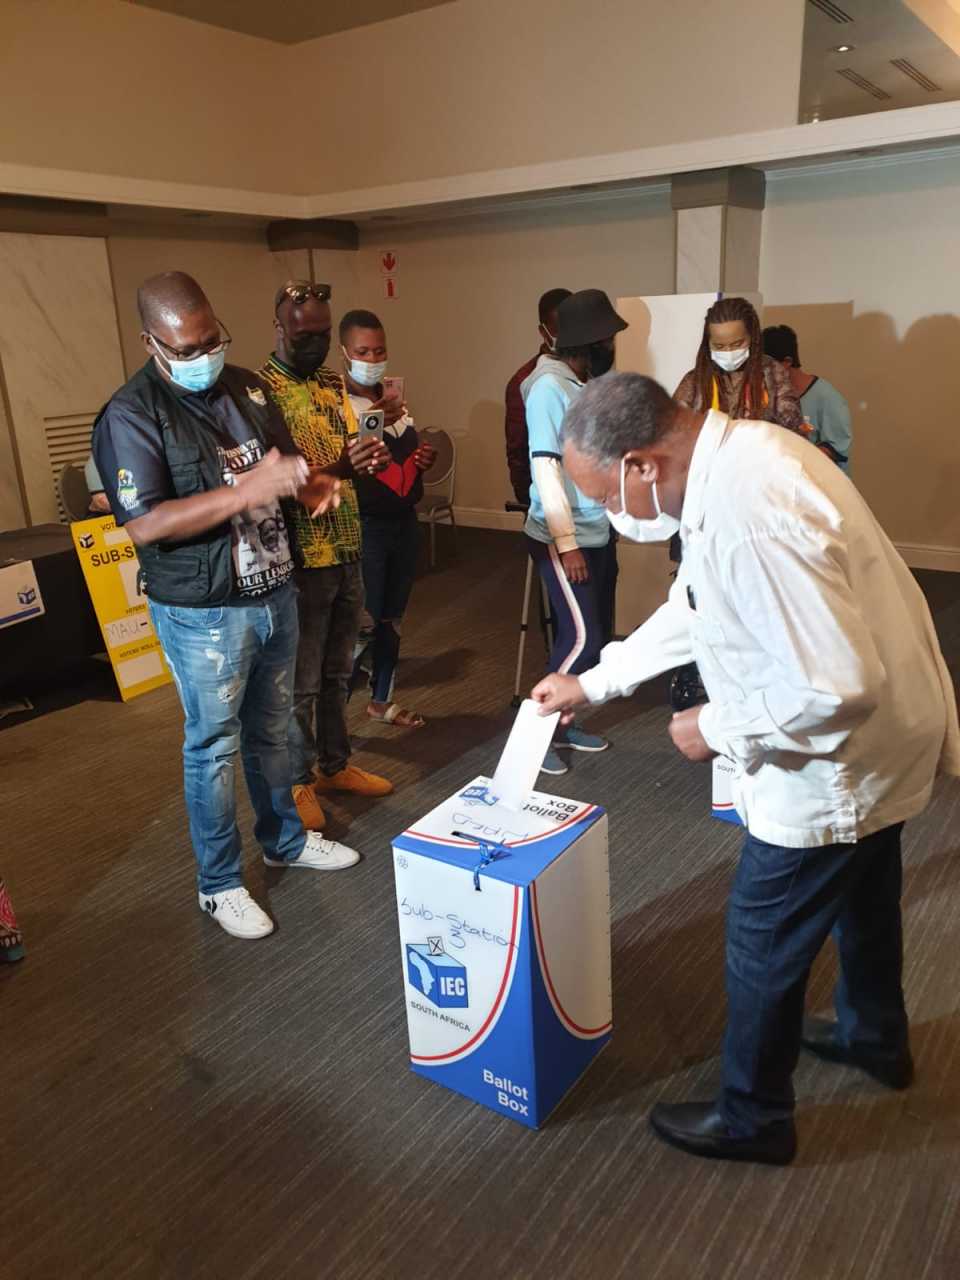 Former deputy president Kgalema Motlanthe casts his vote at the Killarney Country Club. Motlanthe told journalists that municipal elections gave residents power to hold their local representatives to account